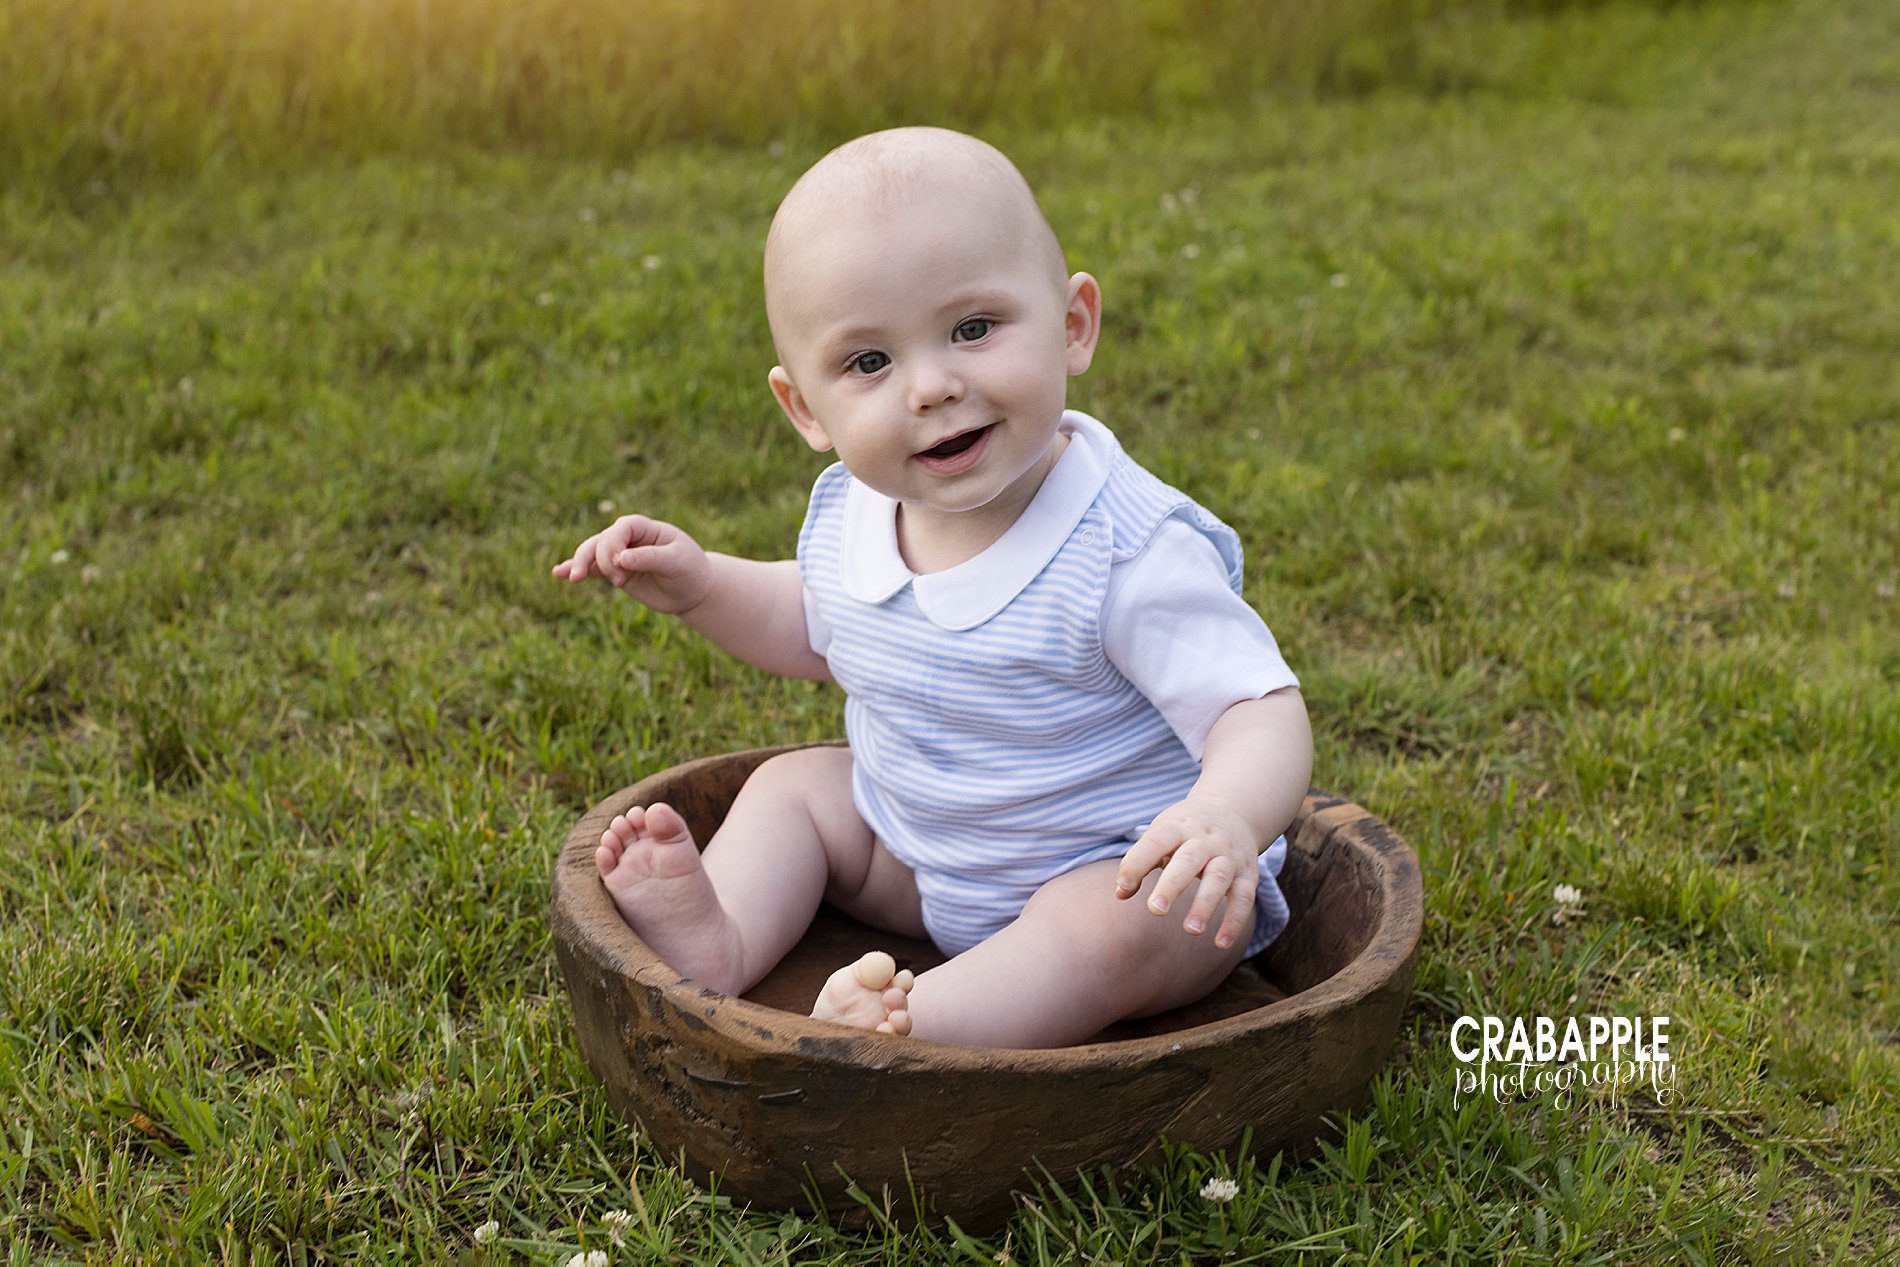 sitter session portraits, 8 month old baby boy, outdoor photos